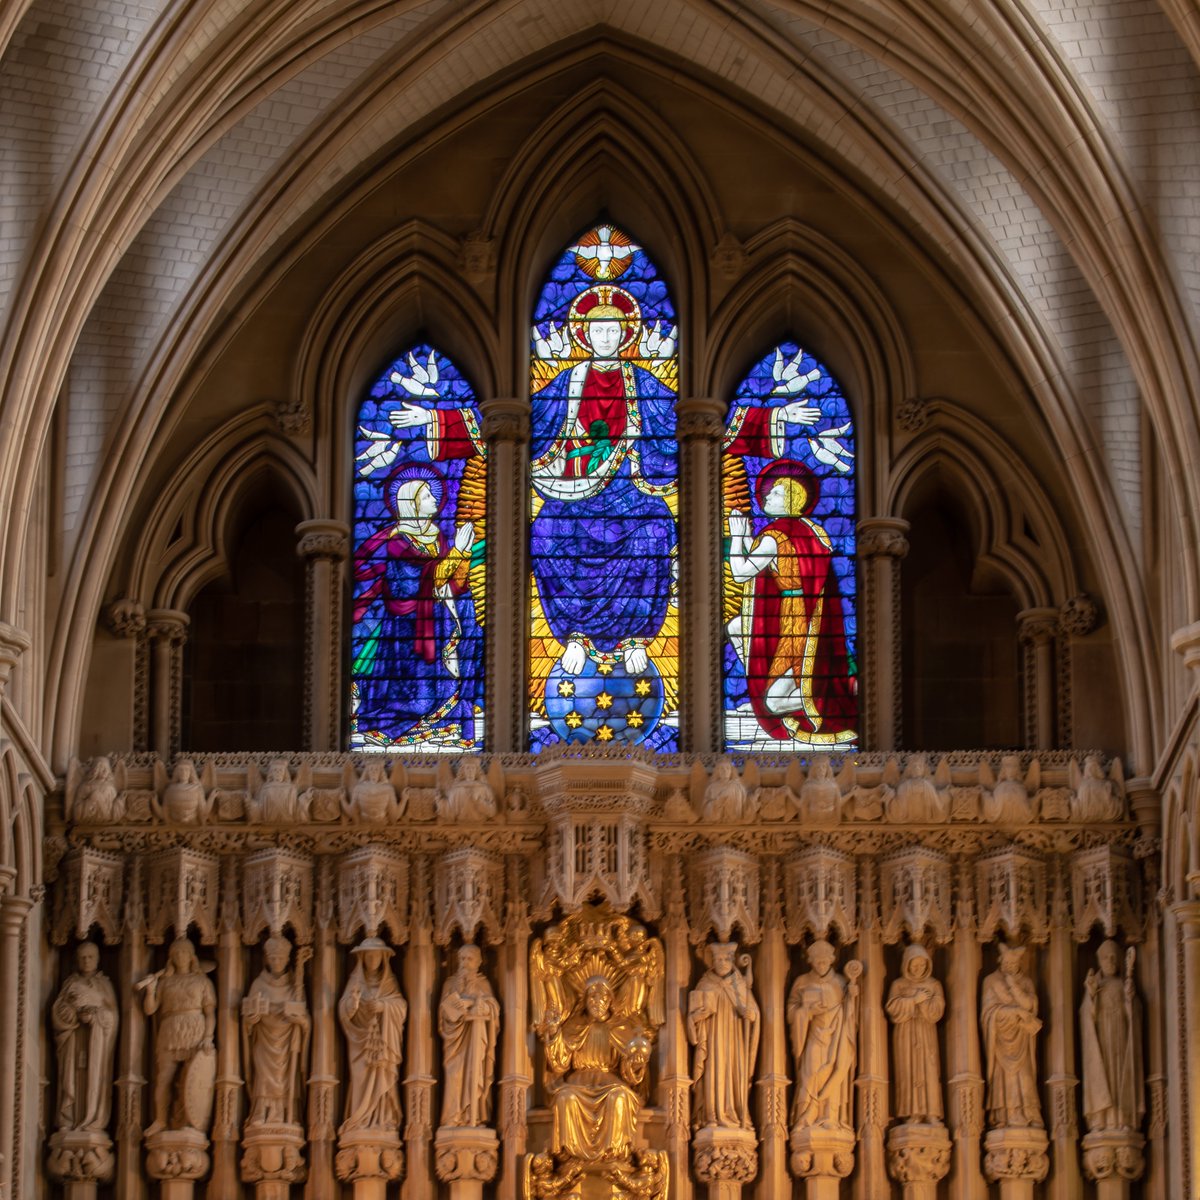 Ascension Day Today we mark the feast of the Ascension, when Jesus ascended into heaven, forty days after Easter Sunday. ✝️ 5.30pm | Choral Eucharist sung by the Cathedral Choir 🎶 7pm | Organ Meditation bit.ly/43W9HEj